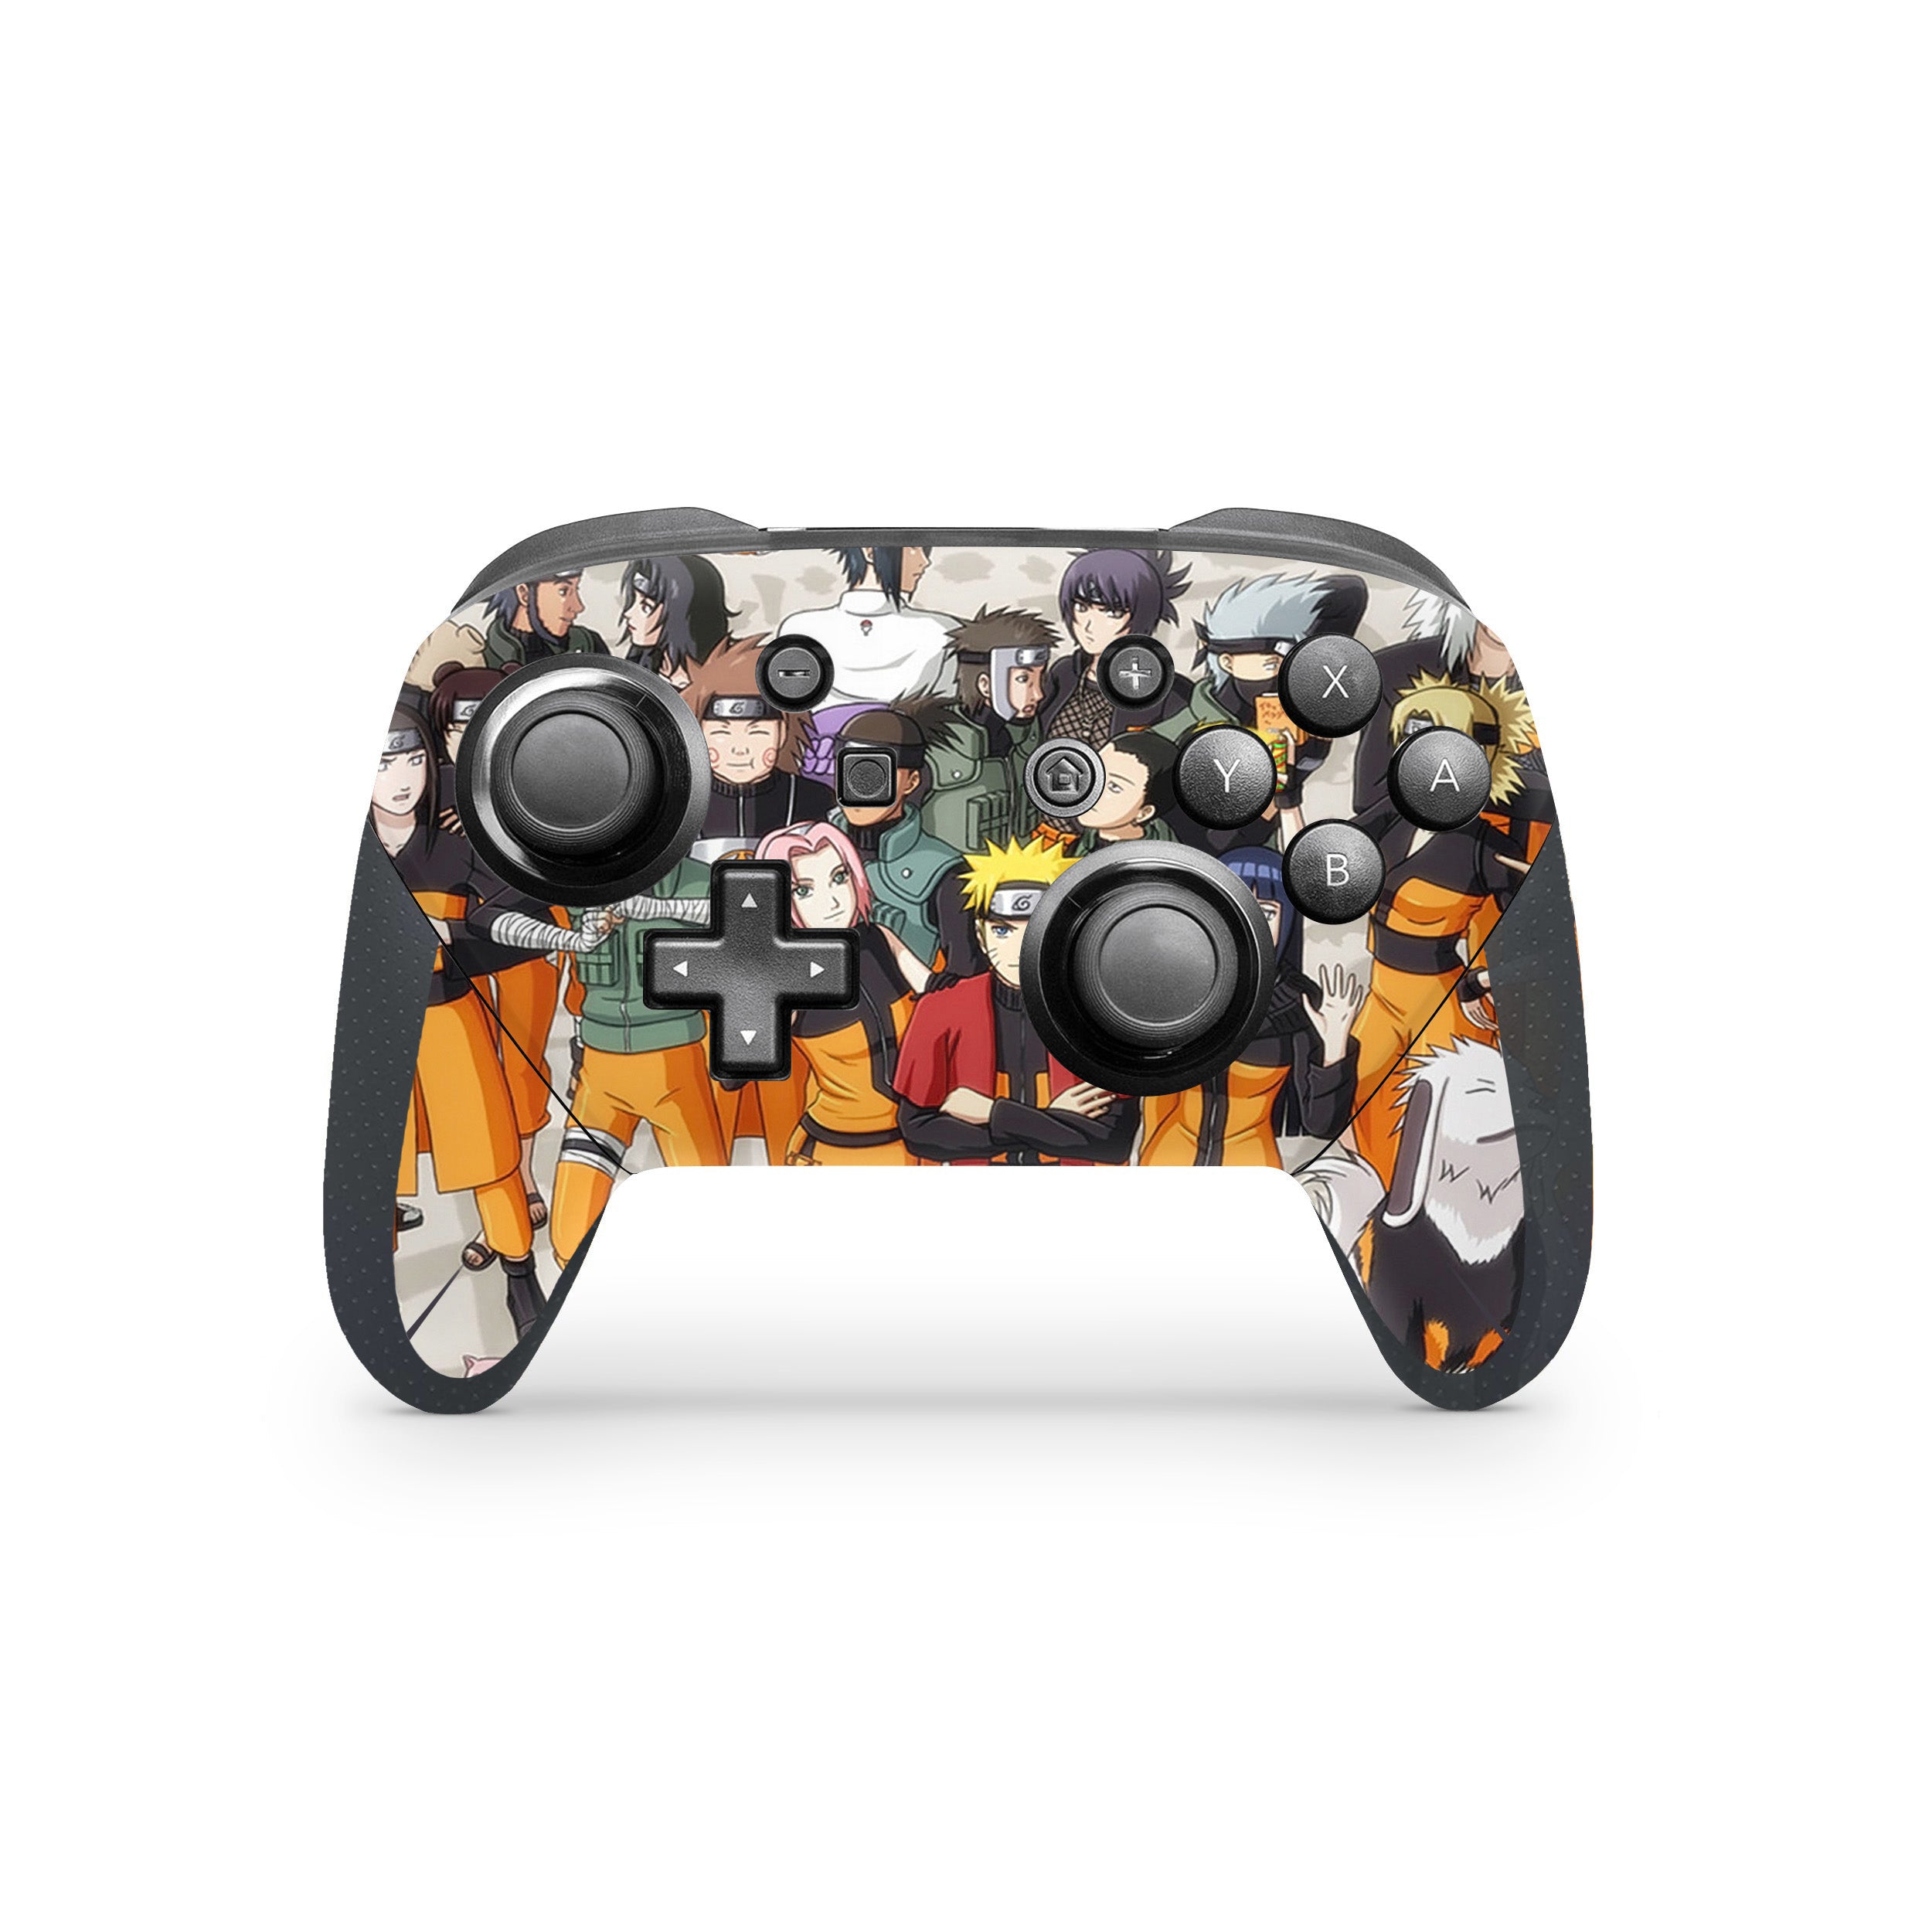 A video game skin featuring a Naruto Squad design for the Switch Pro Controller.